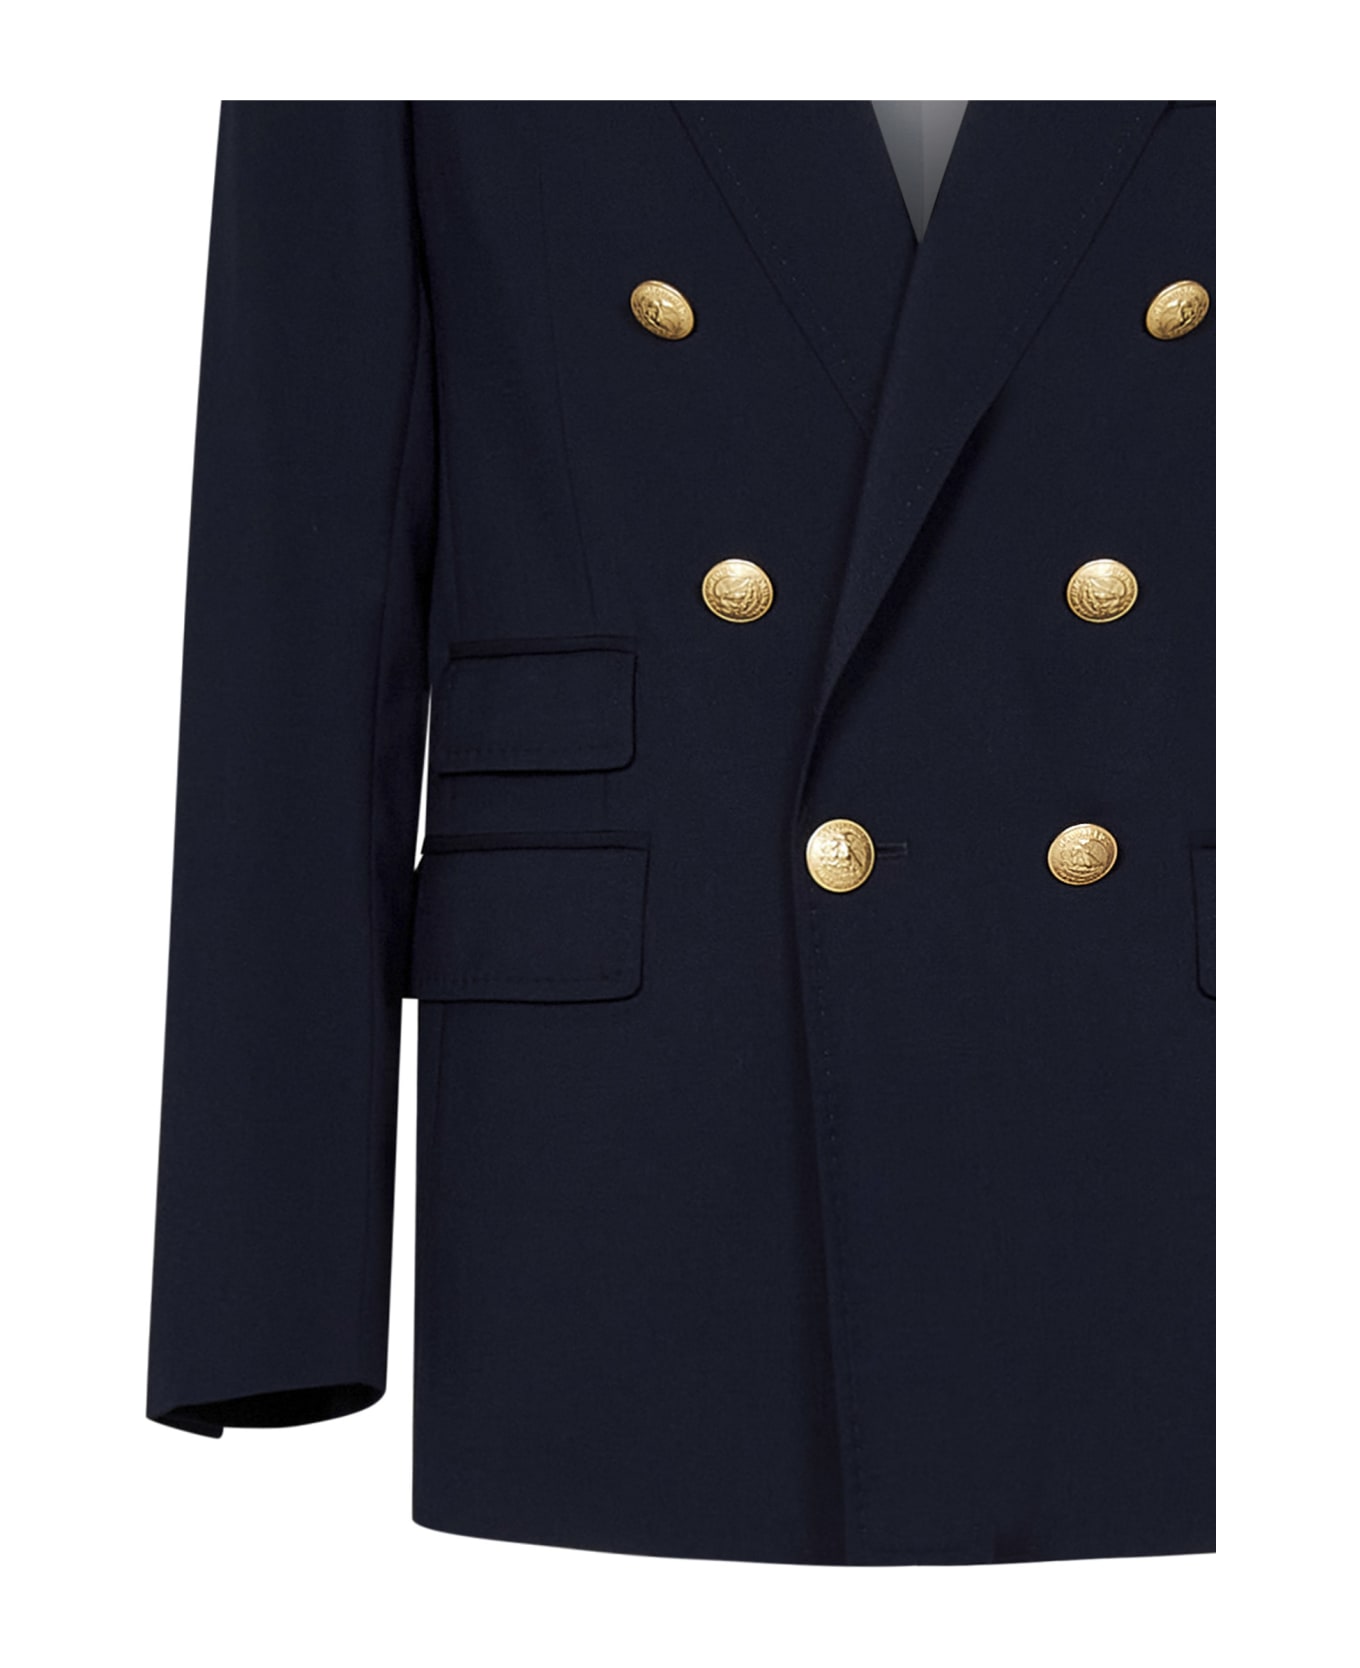 Dsquared2 Palm Beach Double Breasted Blazer - Navy Blue ブレザー